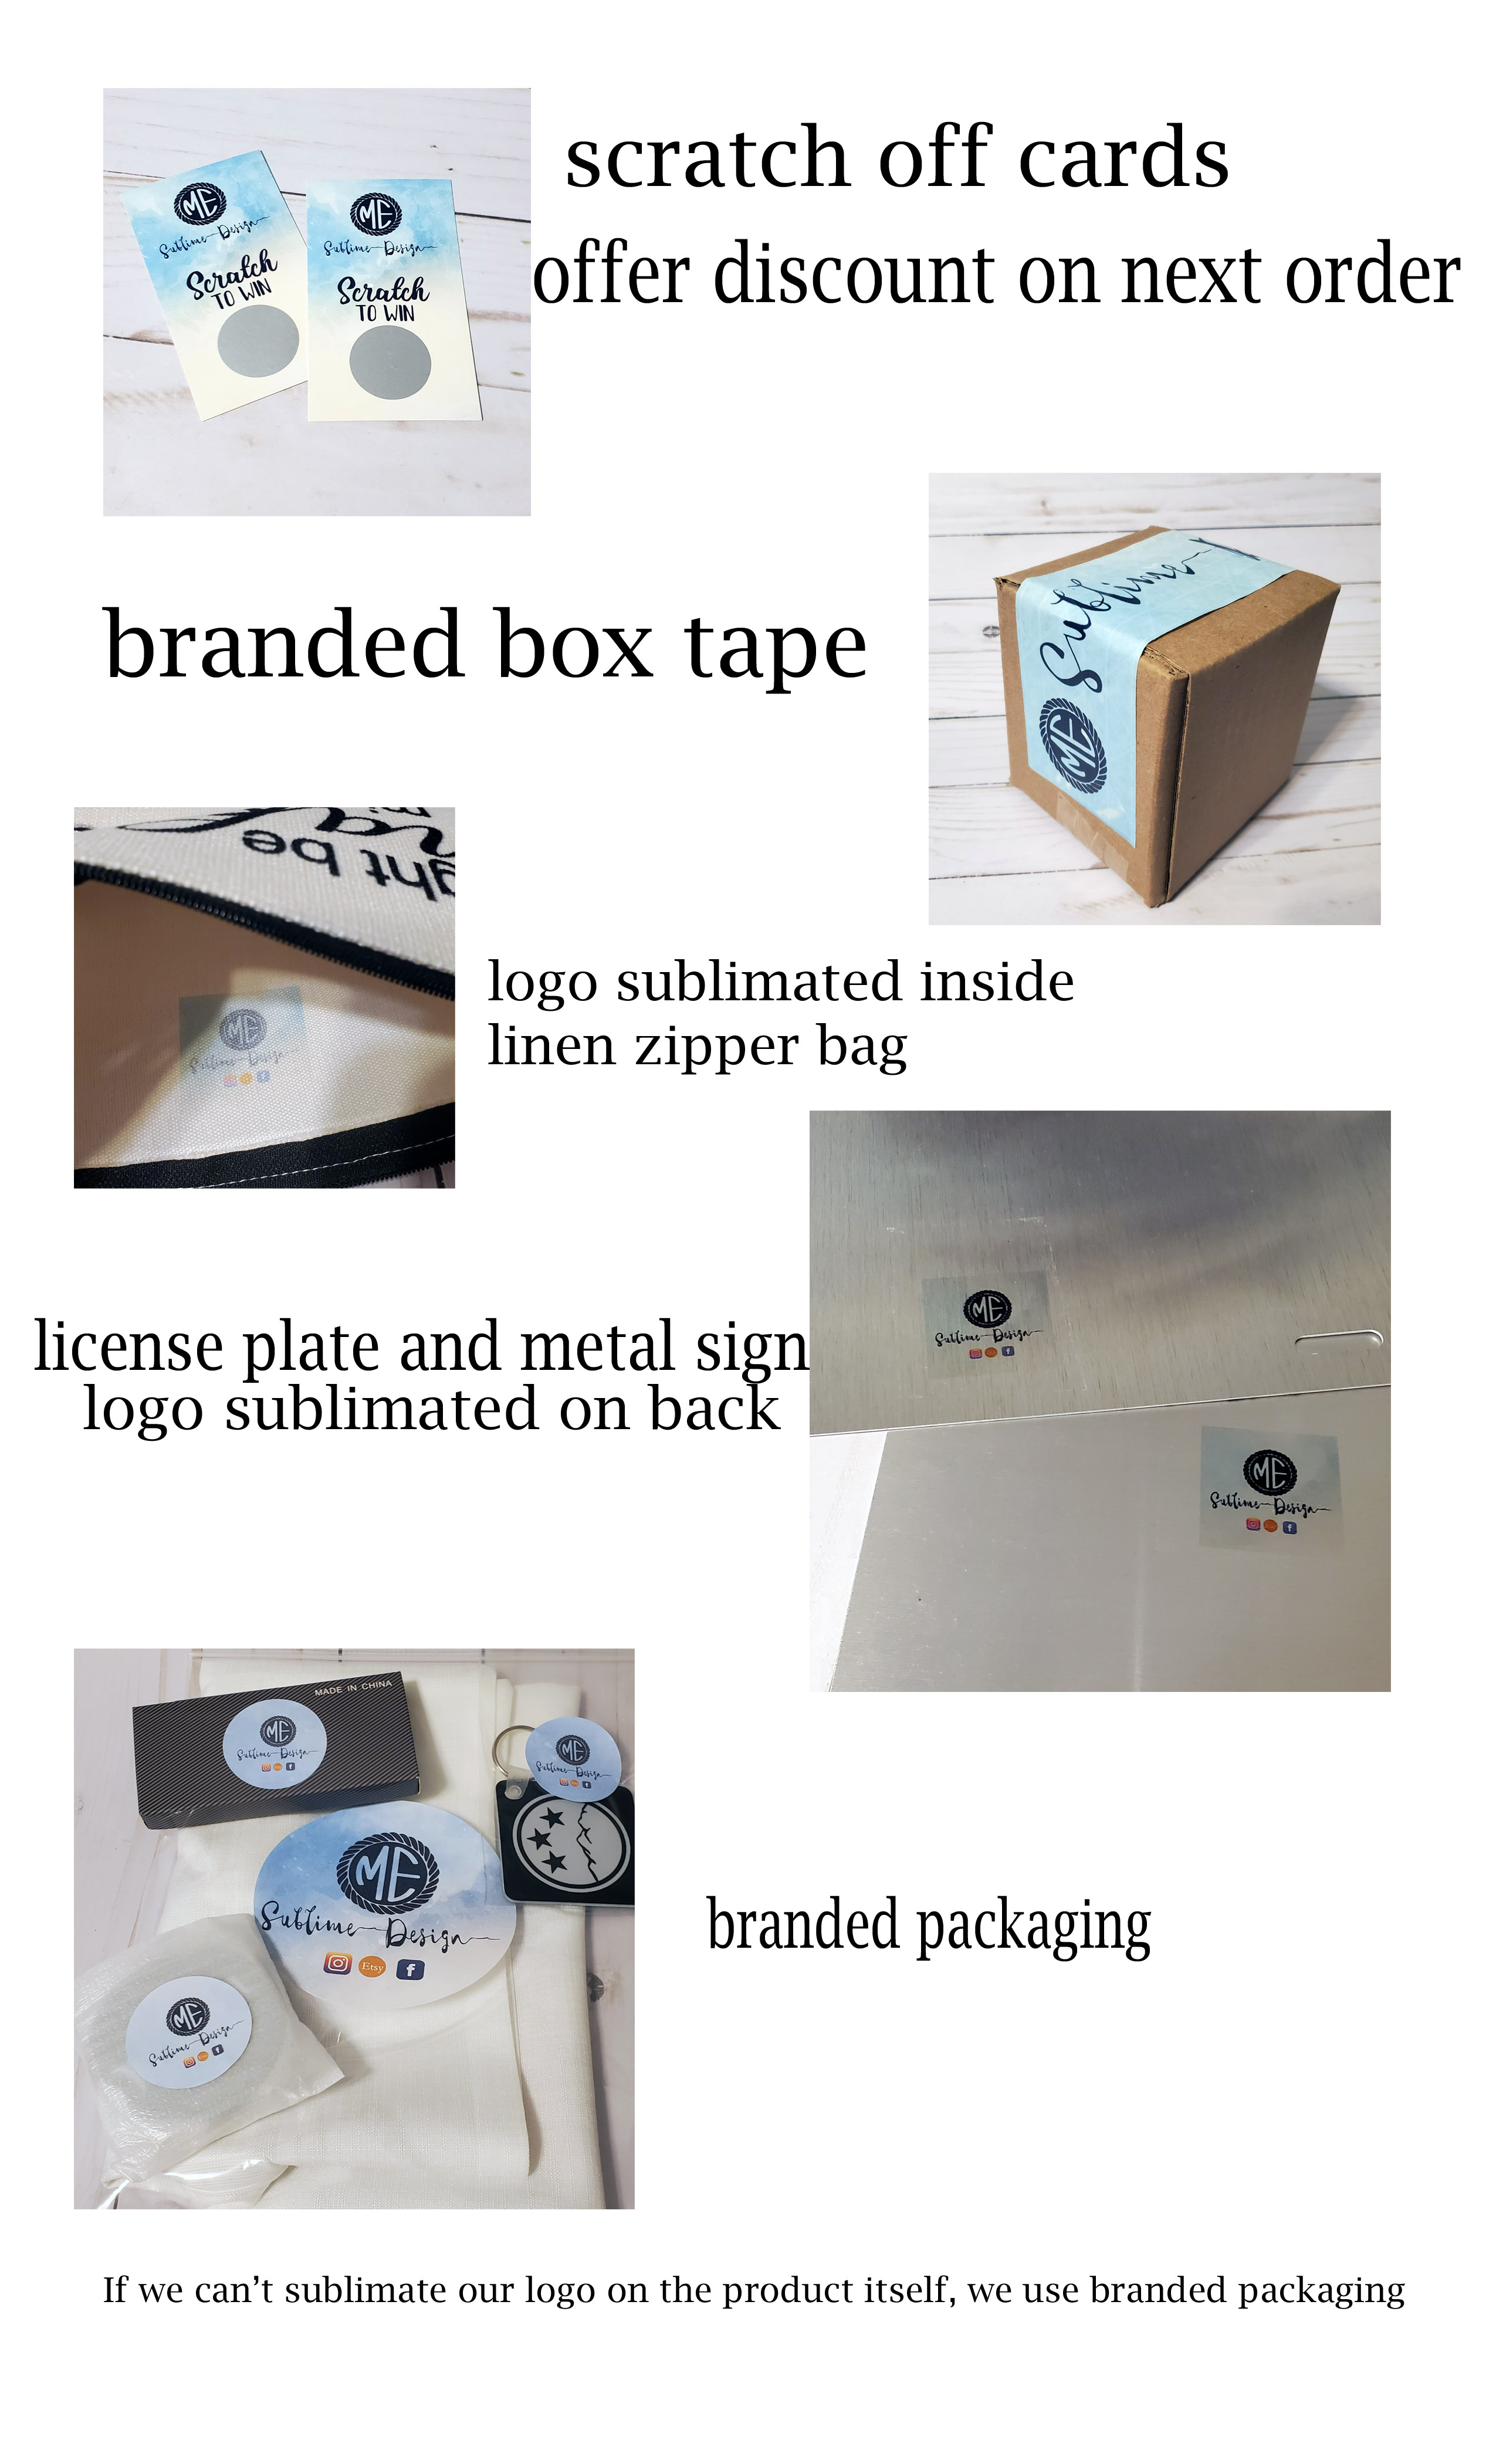 Branding Products  made with sublimation printing